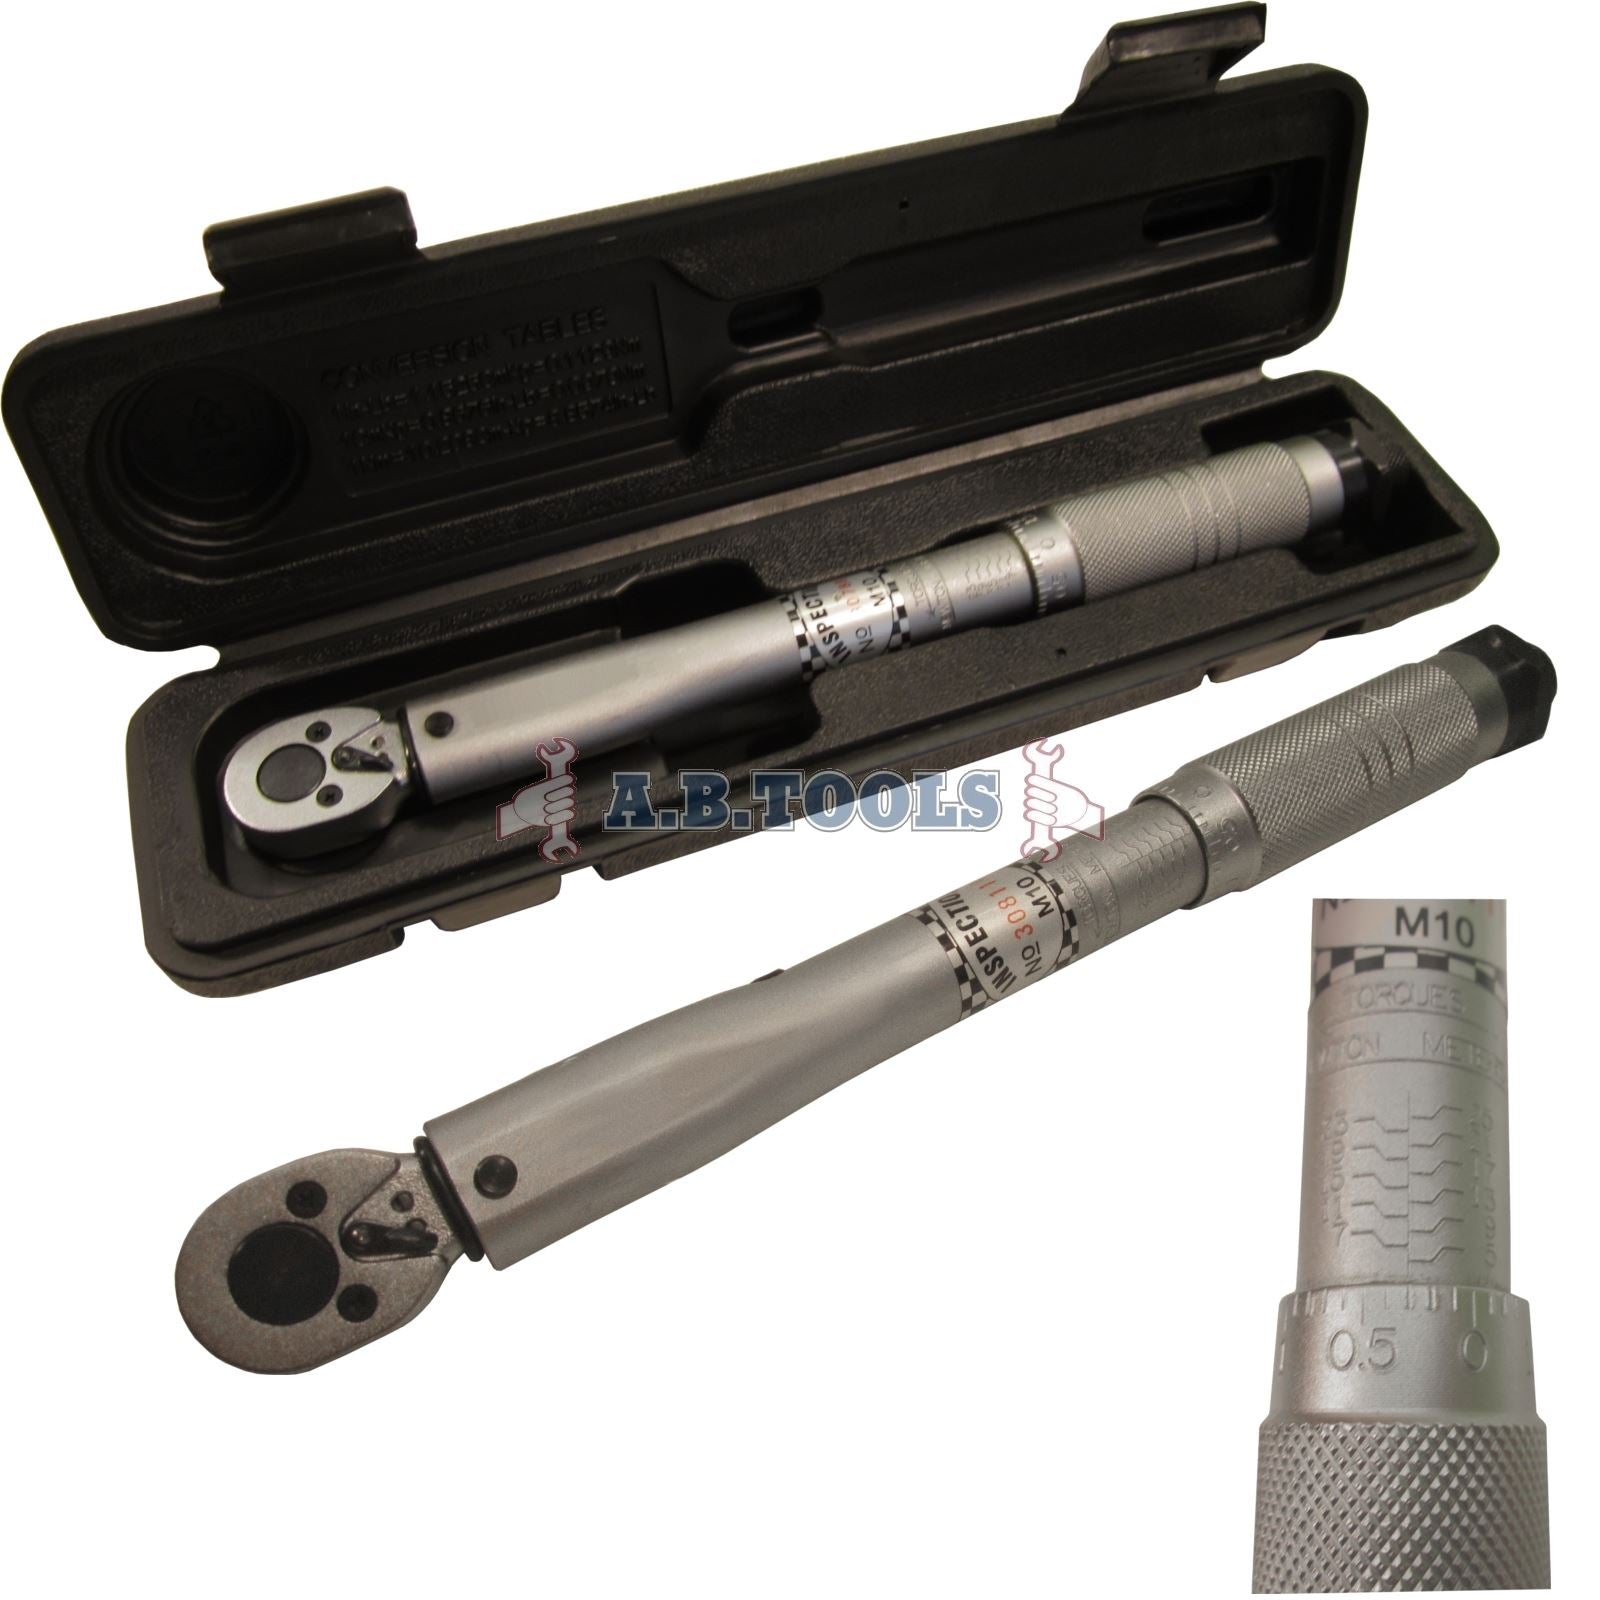 3/8" drive professional torque ratchet wrench 5 - 25 Nm / 4 - 18 ft/lbs TE526